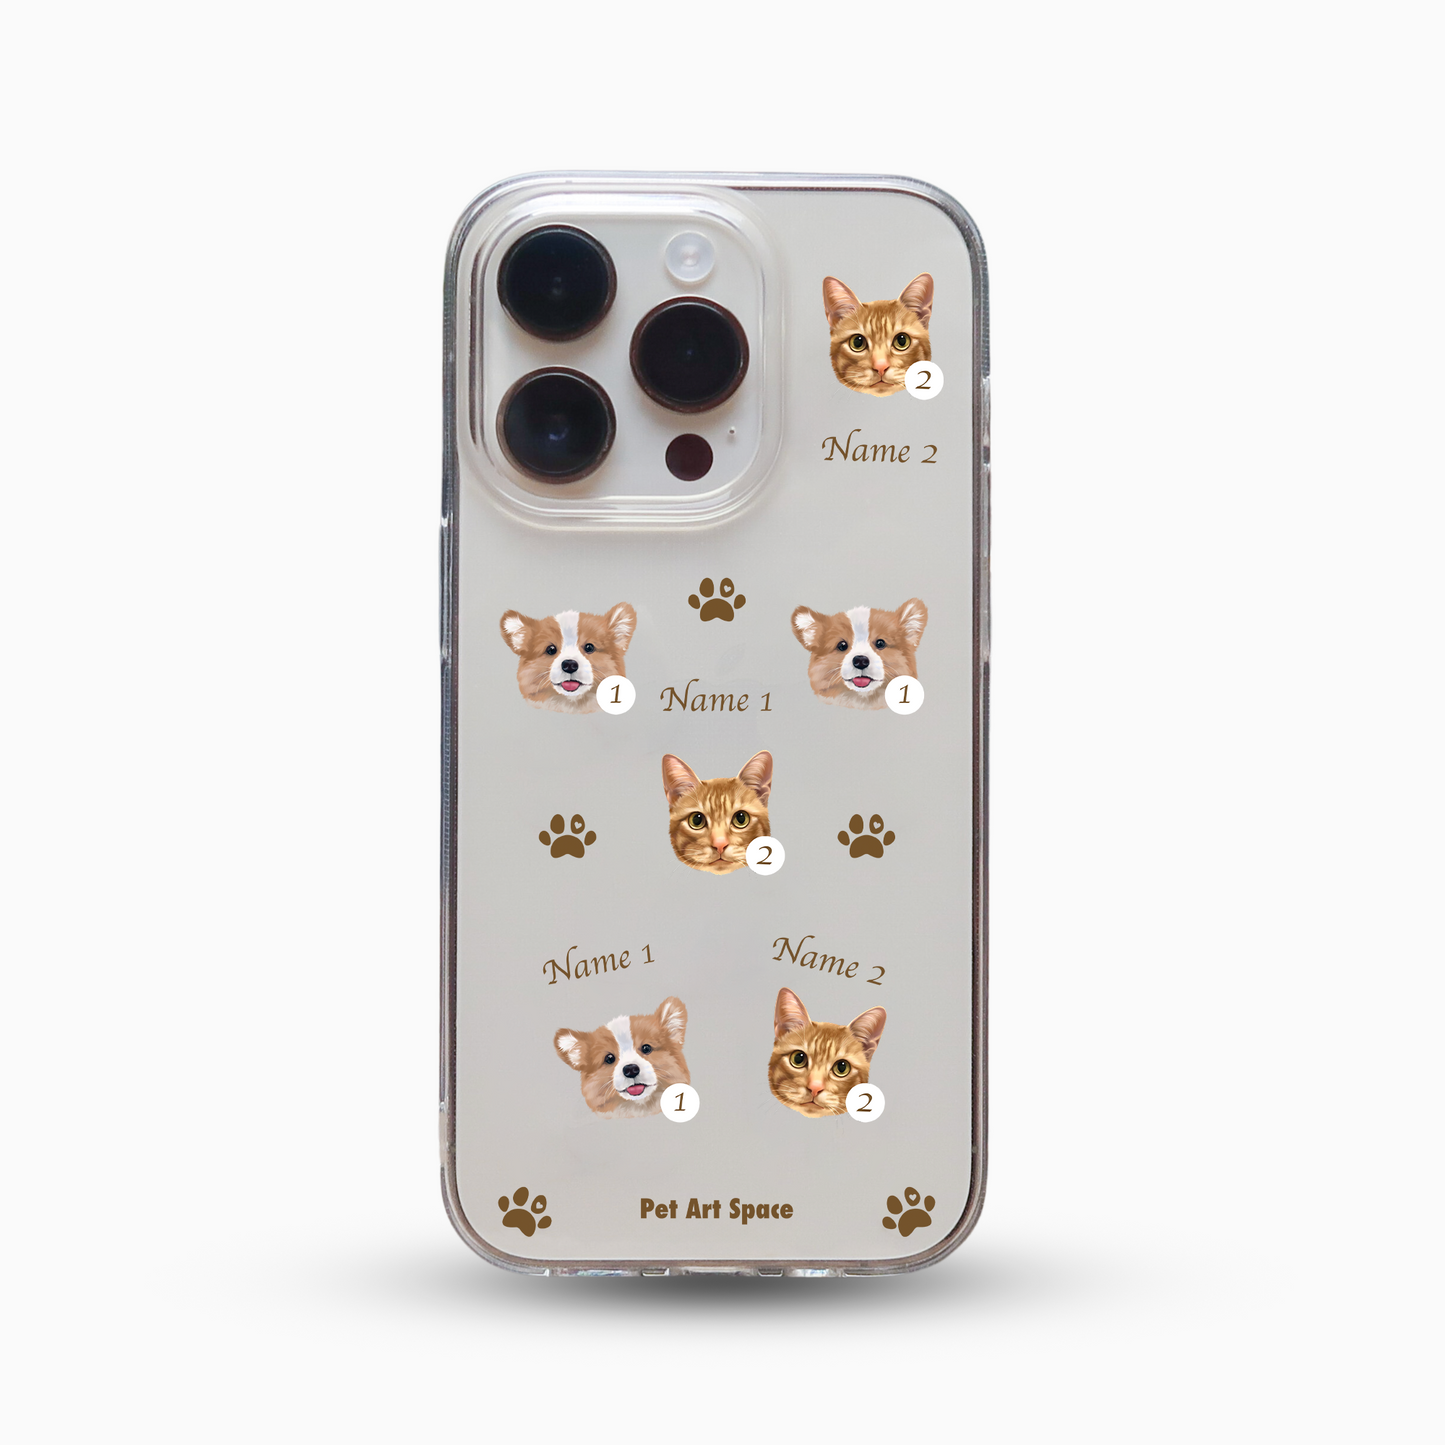 Paws A for 2 pets - Soft Clear Case with Camera Uncovered